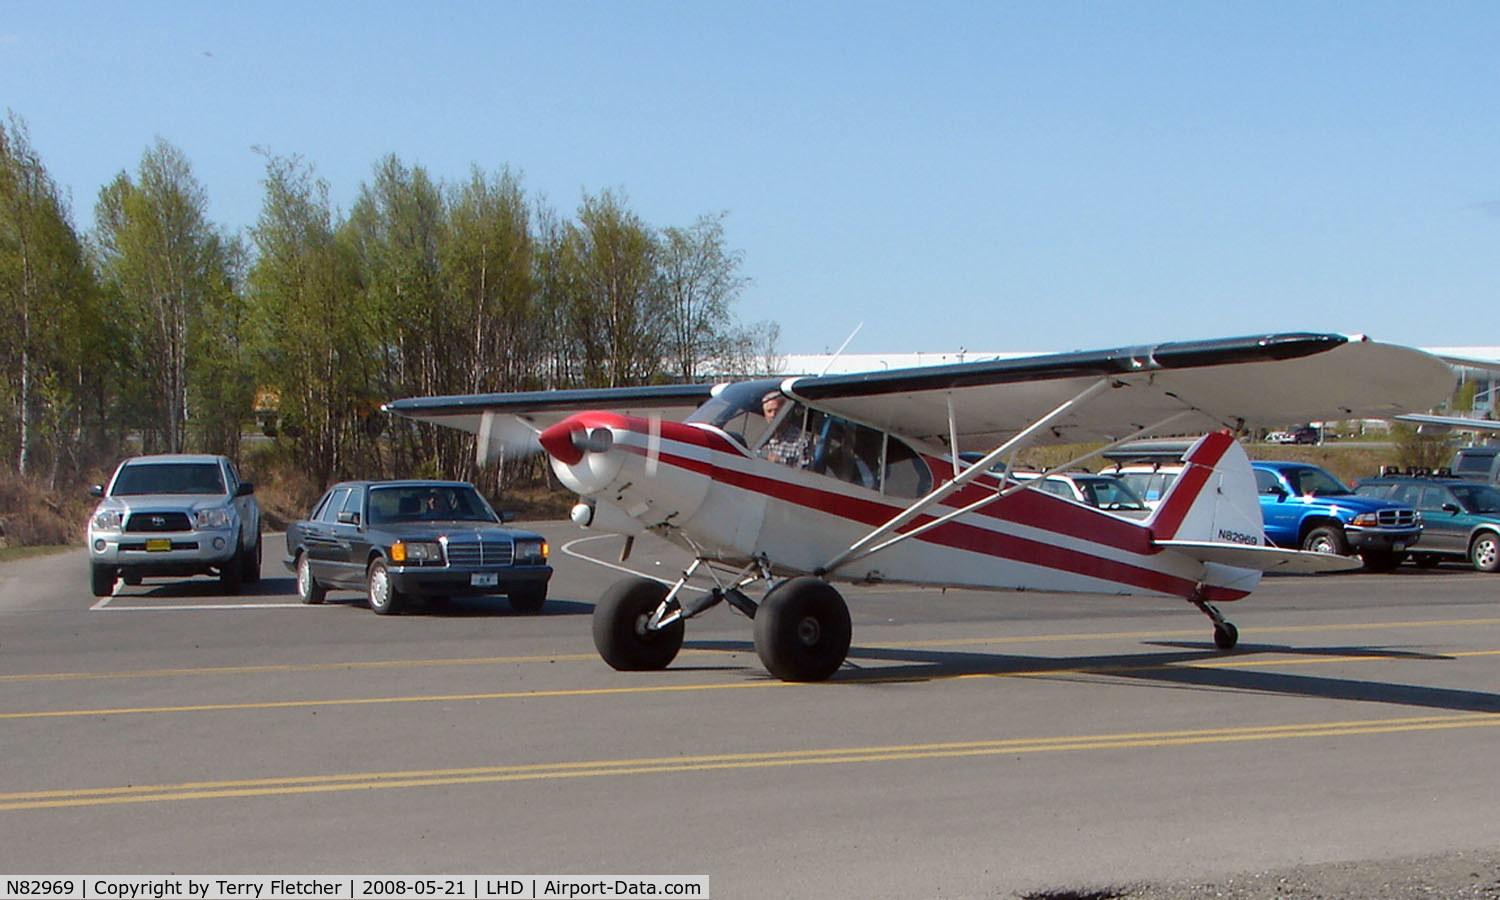 N82969, 1978 Piper PA-18-150 Super Cub C/N 18-7909041, Planes have priority on the roads around Lake Hood